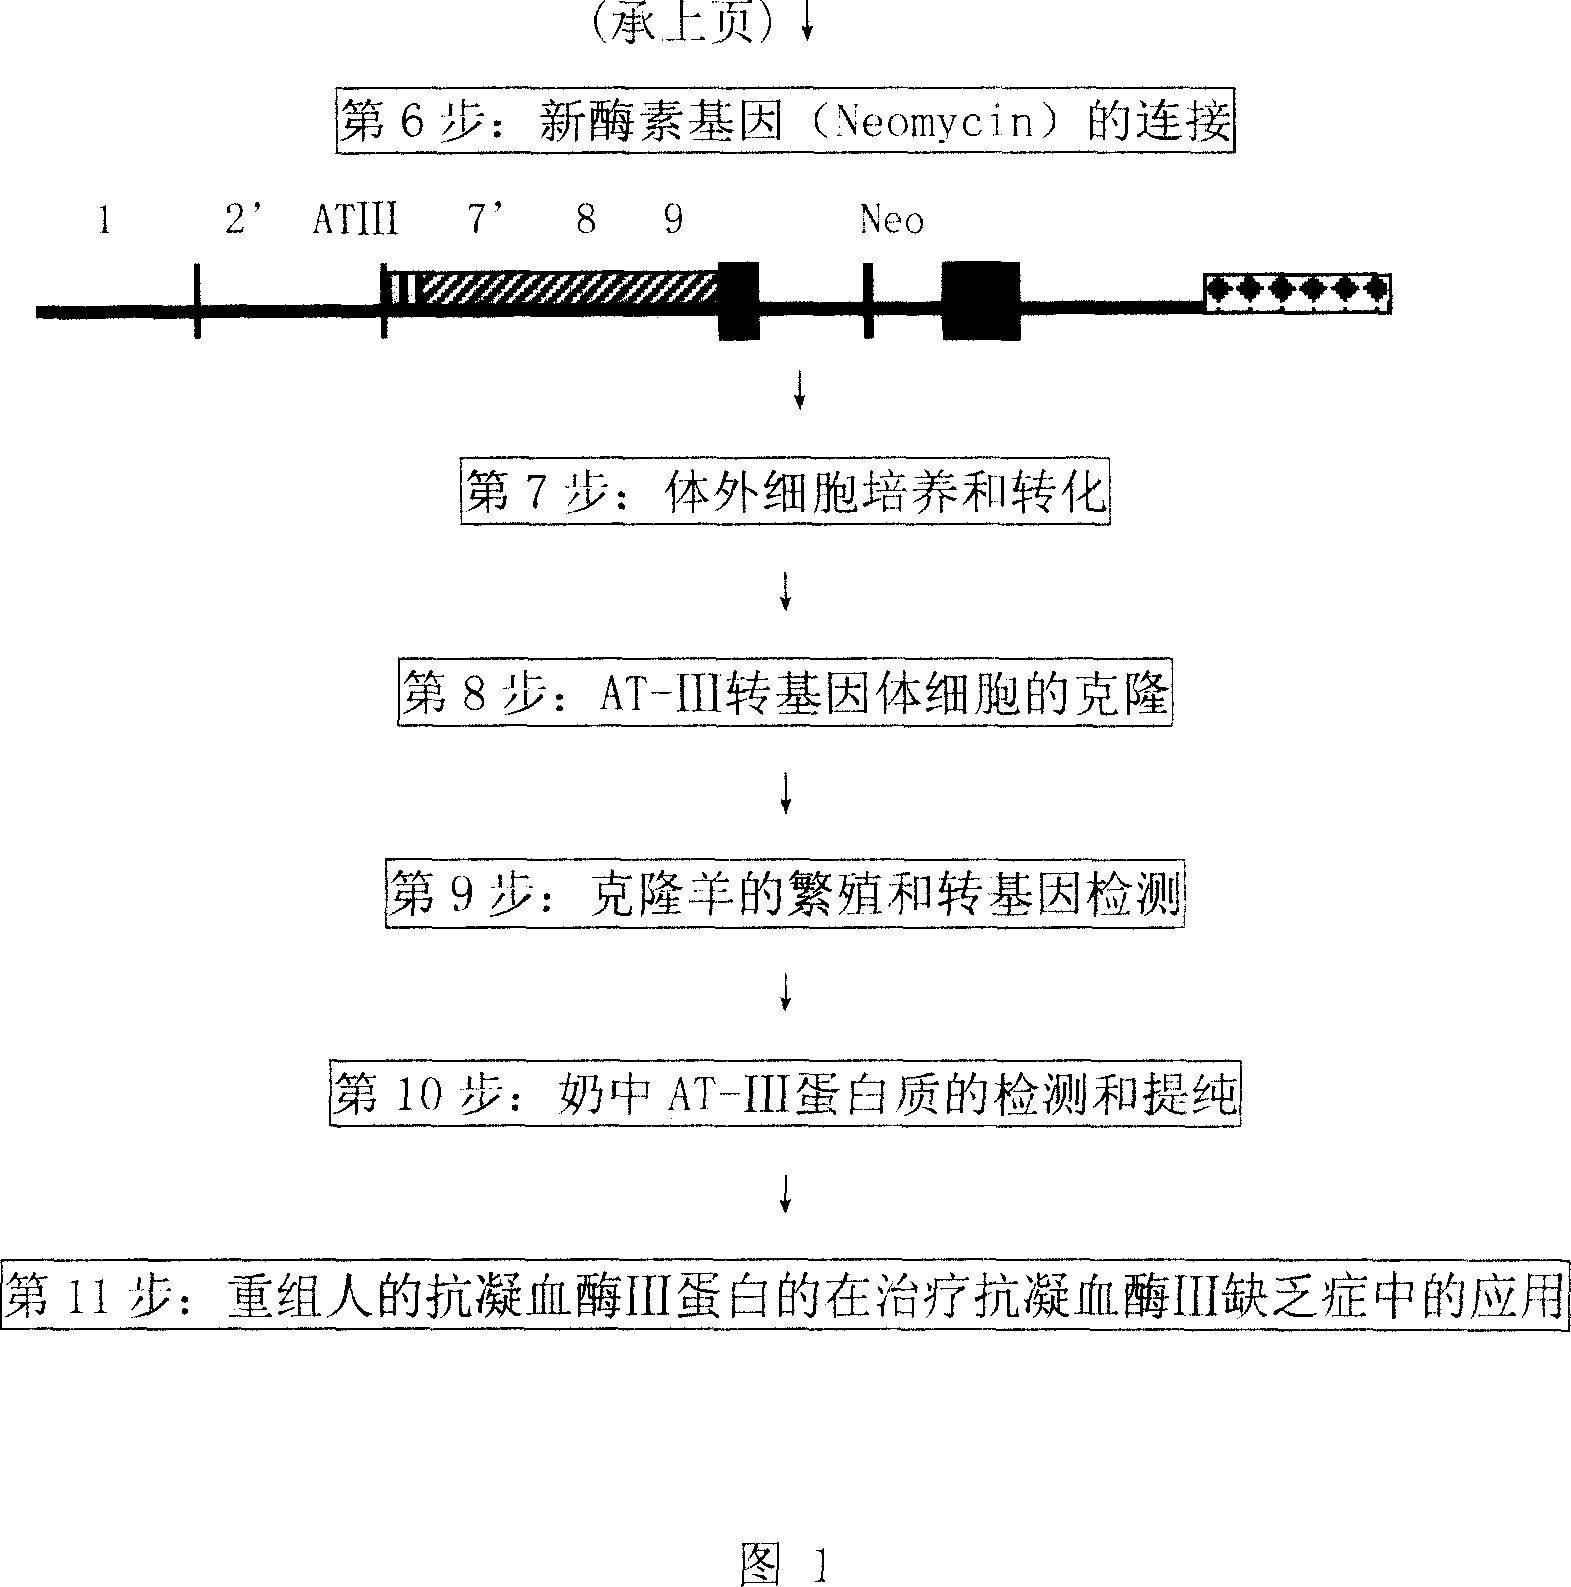 Method for preparing recombinant human antithrombase III protein using mammary gland biological reactor